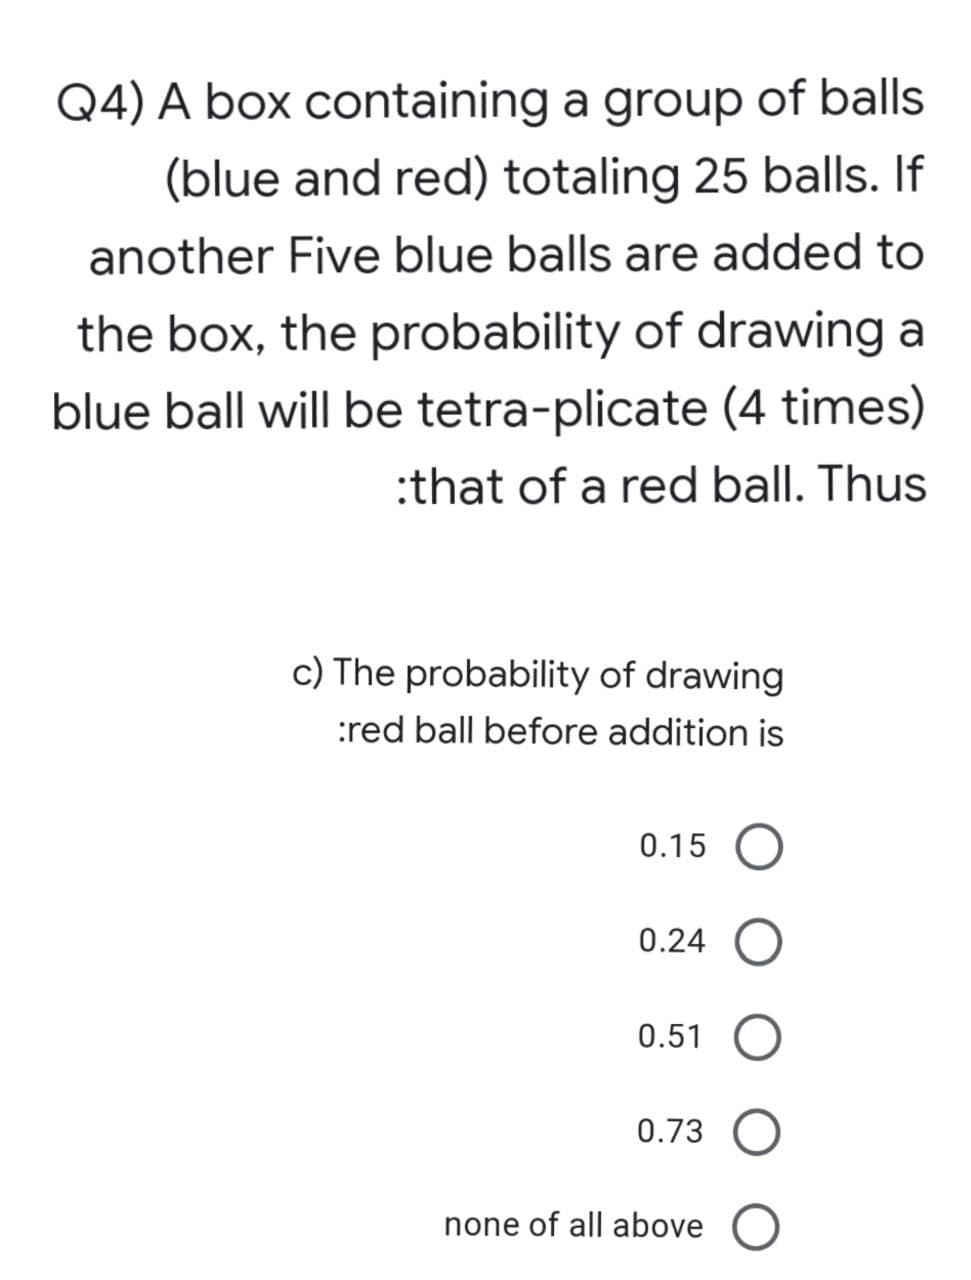 Q4) A box containing a group of balls
(blue and red) totaling 25 balls. If
another Five blue balls are added to
the box, the probability of drawing a
blue ball will be tetra-plicate (4 times)
:that of a red ball. Thus
c) The probability of drawing
:red ball before addition is
0.15
0.24
0.51 O
0.73 O
none of all above O